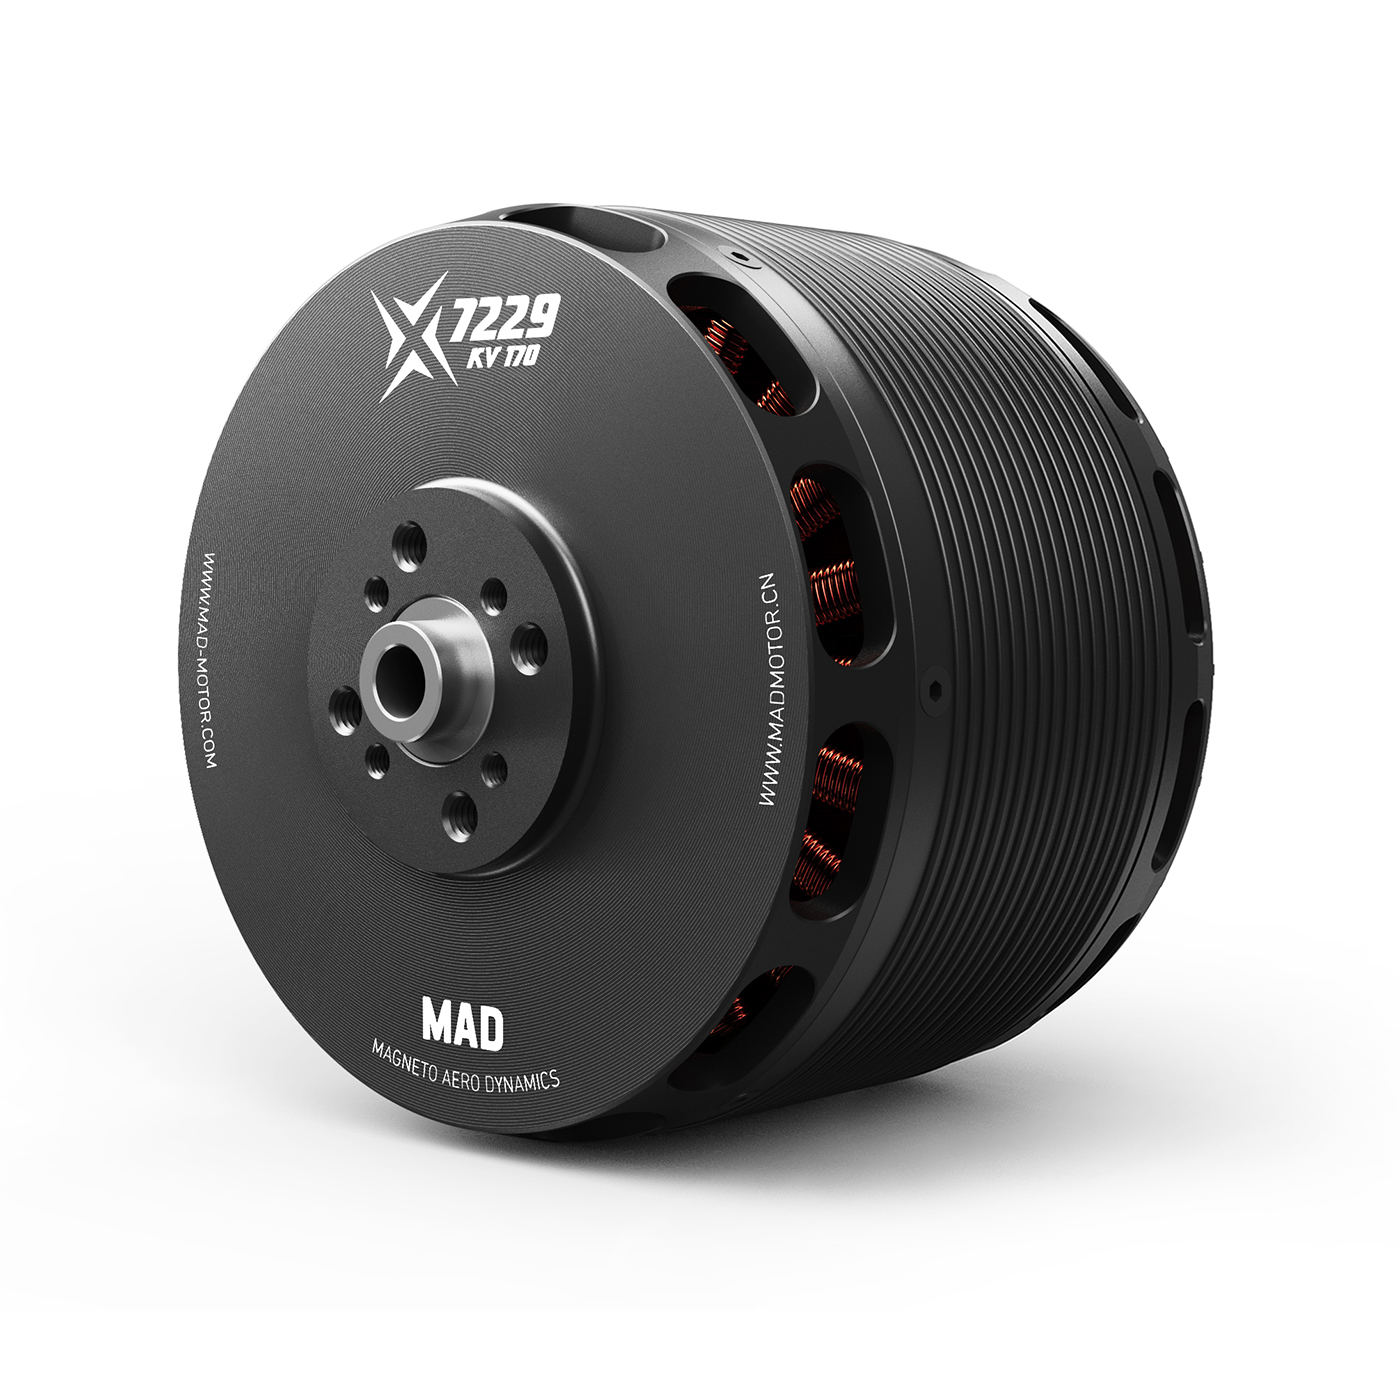 MAD X7229  brushless motor suitable for 120E-170E aircraft,corresponding to gasoline engine about 30-40CC